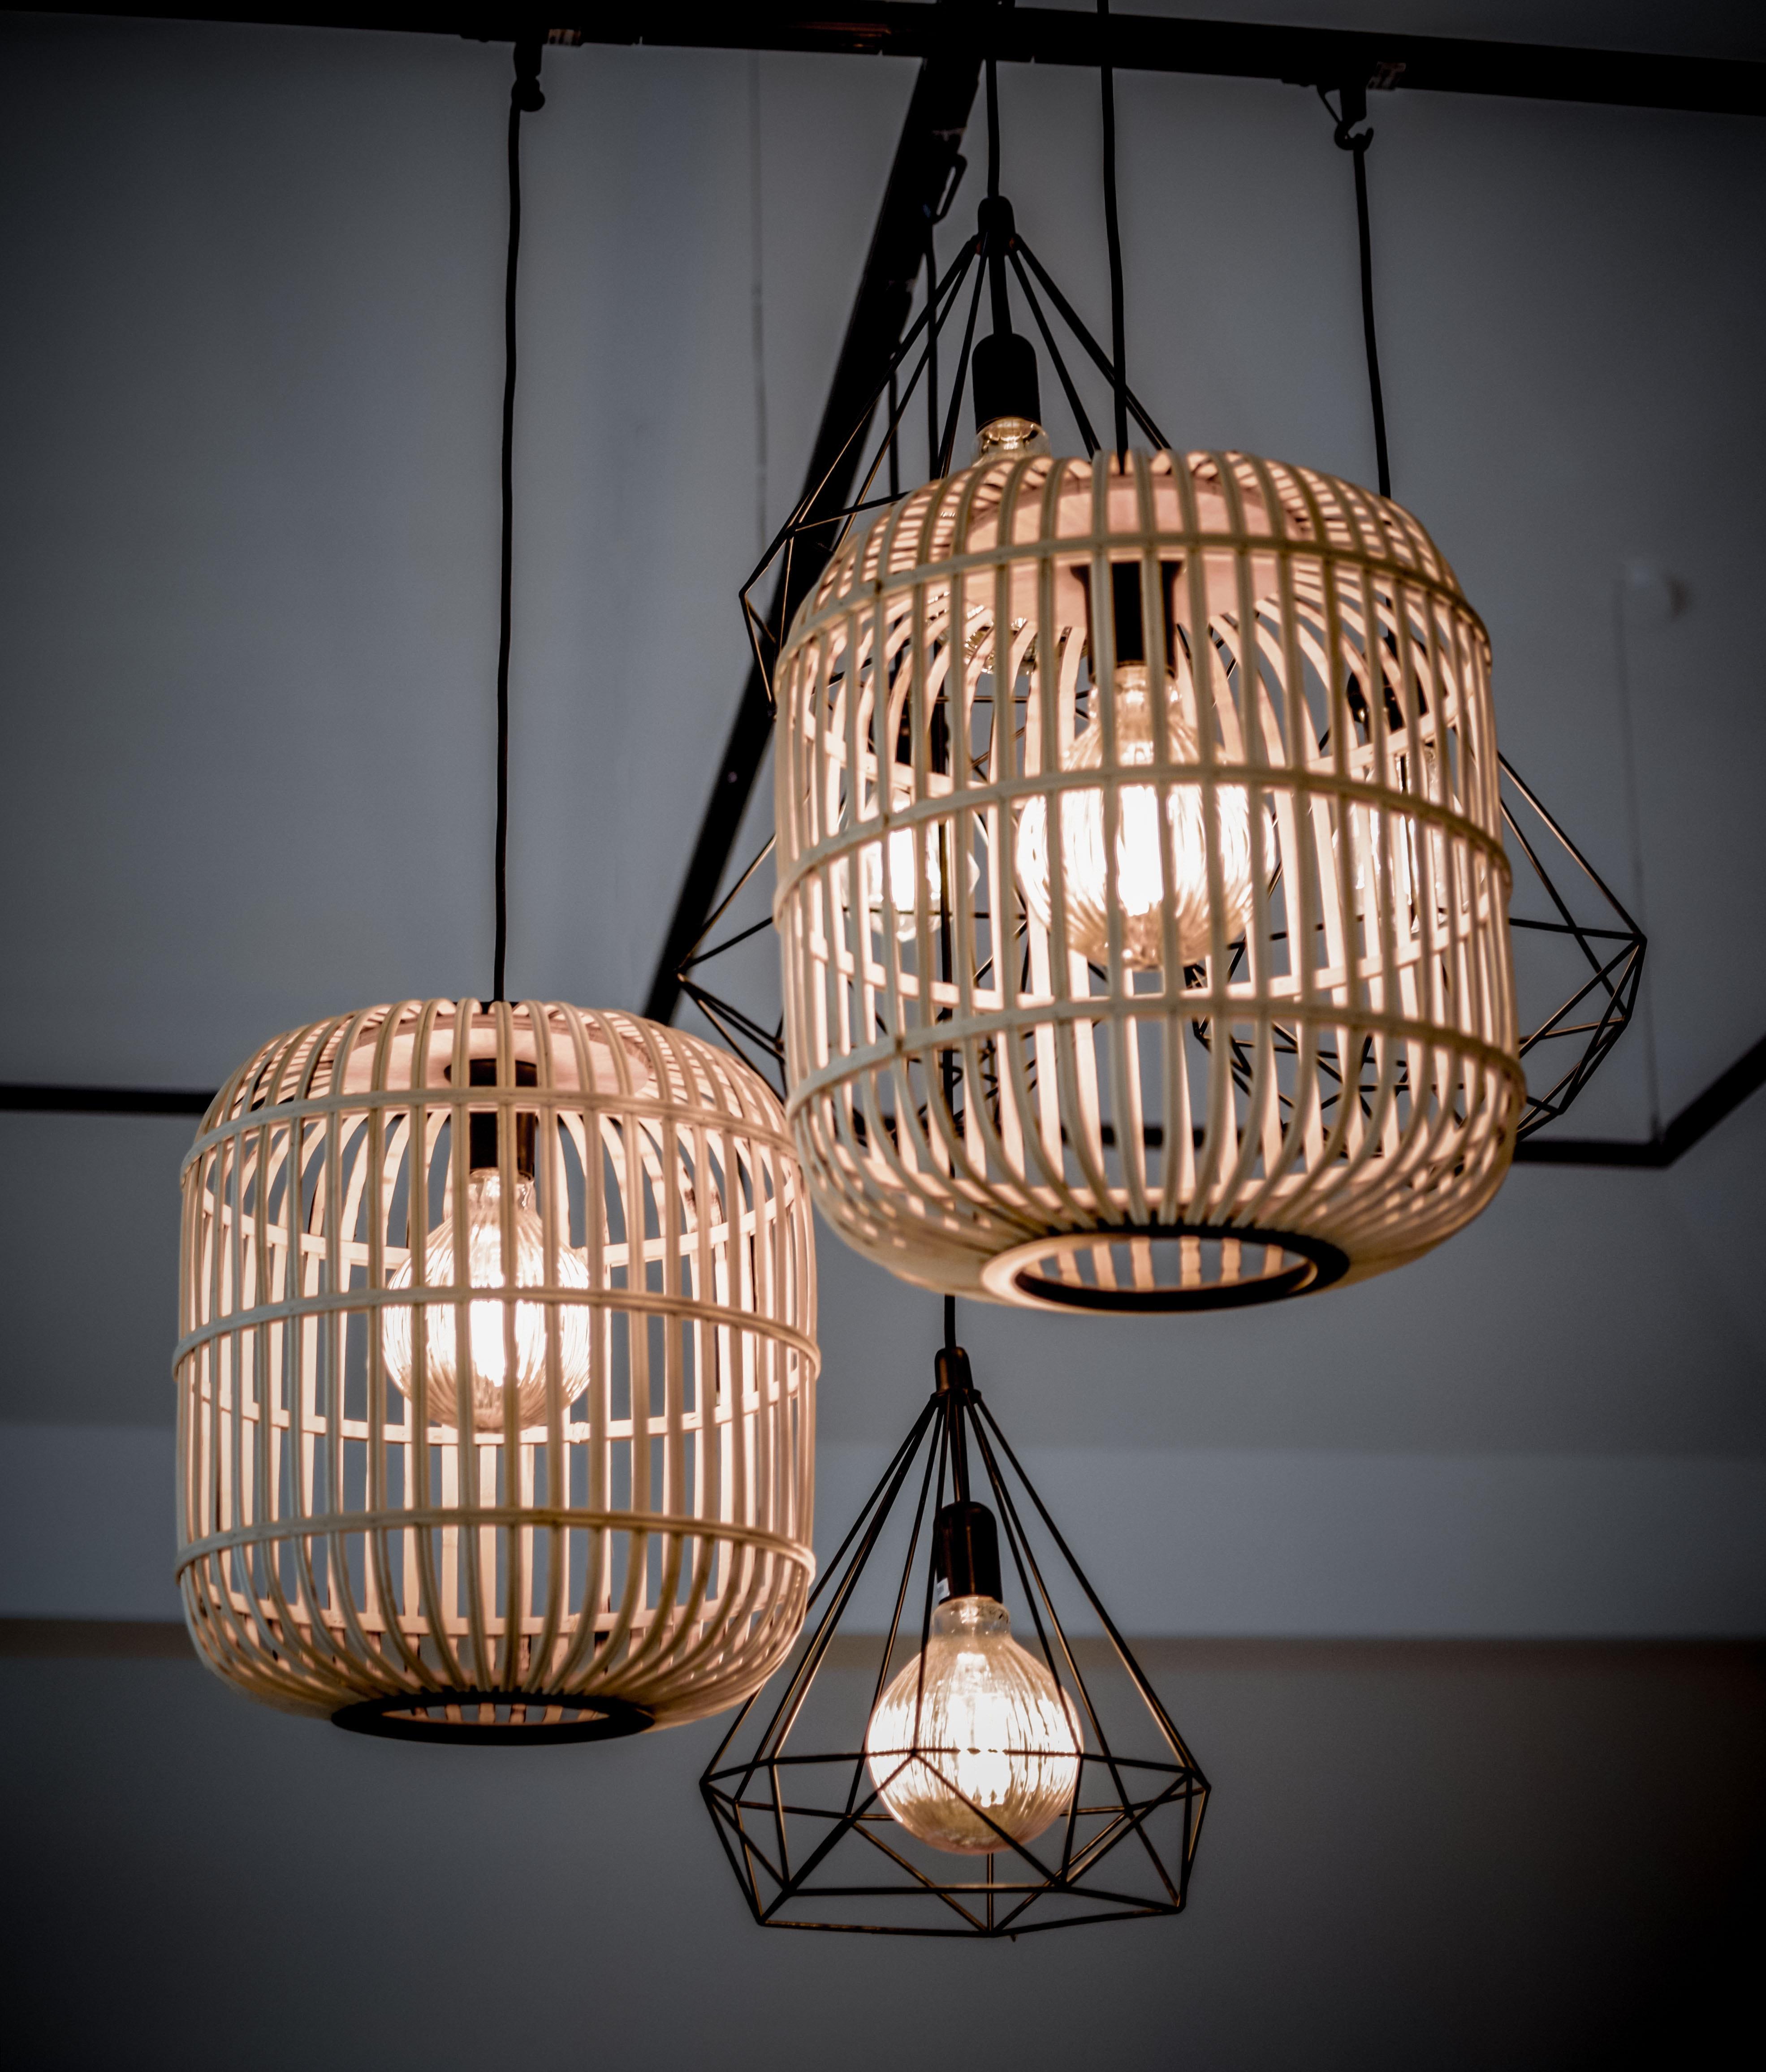  How To Change Pendant Light Shade 